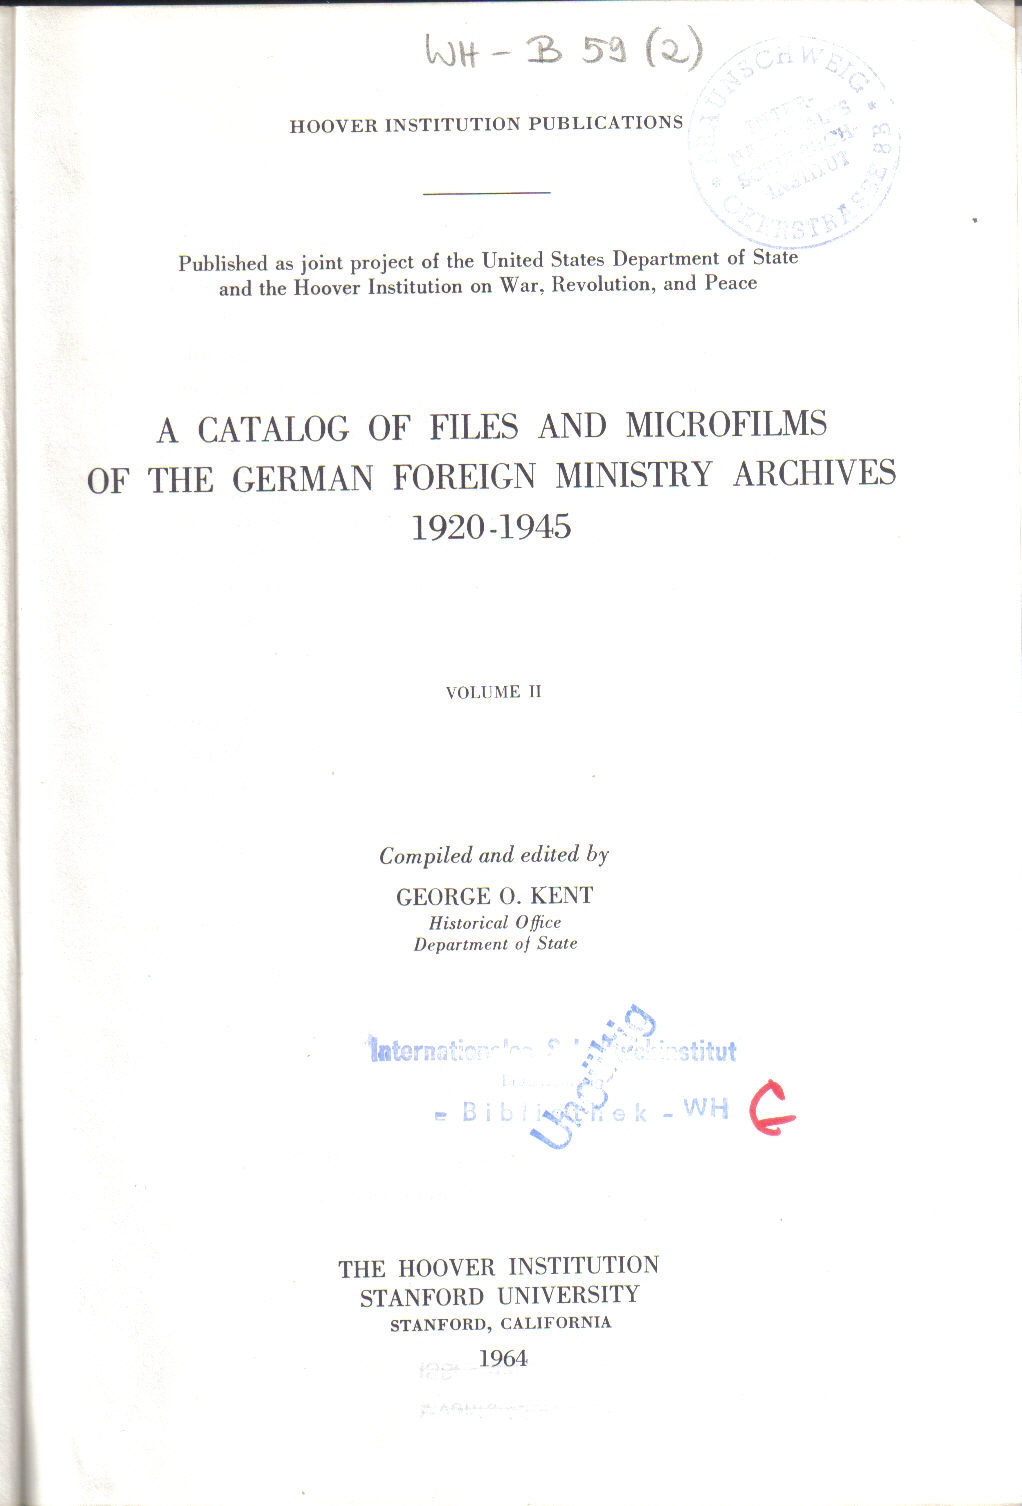 Kent,George O.  A Catalog of Files and Microfilms of the German Foreign Ministry 